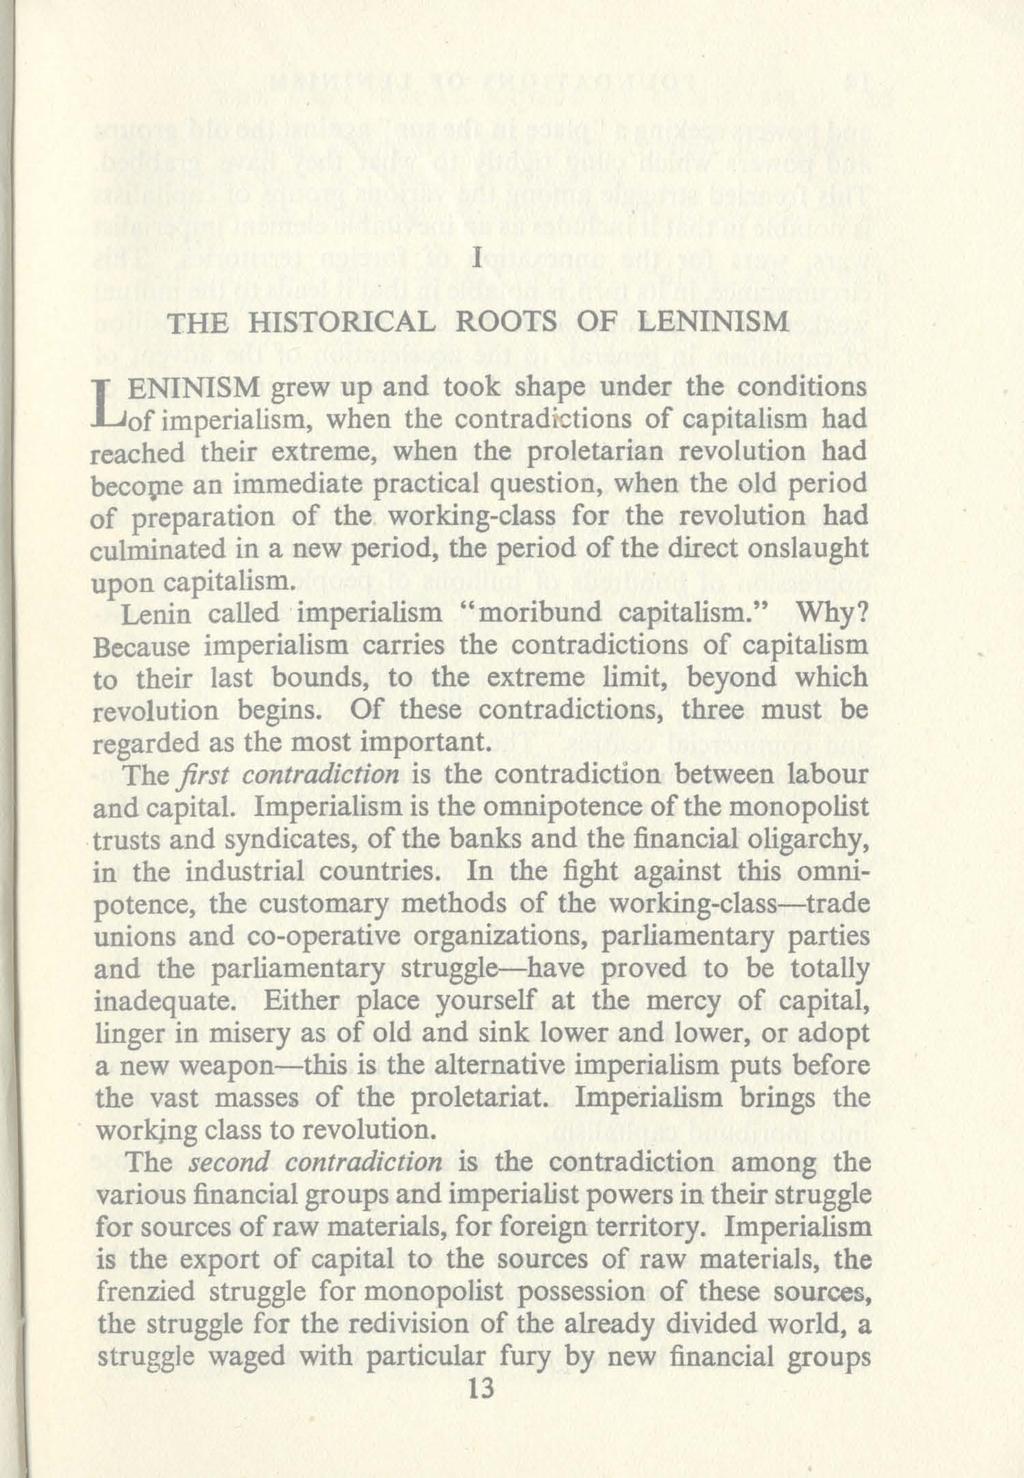 THE HISTORICAL ROOTS OF LENINISM L;n:~~~li~:,Ww~:~~et~~~t:::~~io~~d~~~~;i~~rs~ti~:~ reached their extreme, when the proletarian revolution had become an immediate practical question, when the old